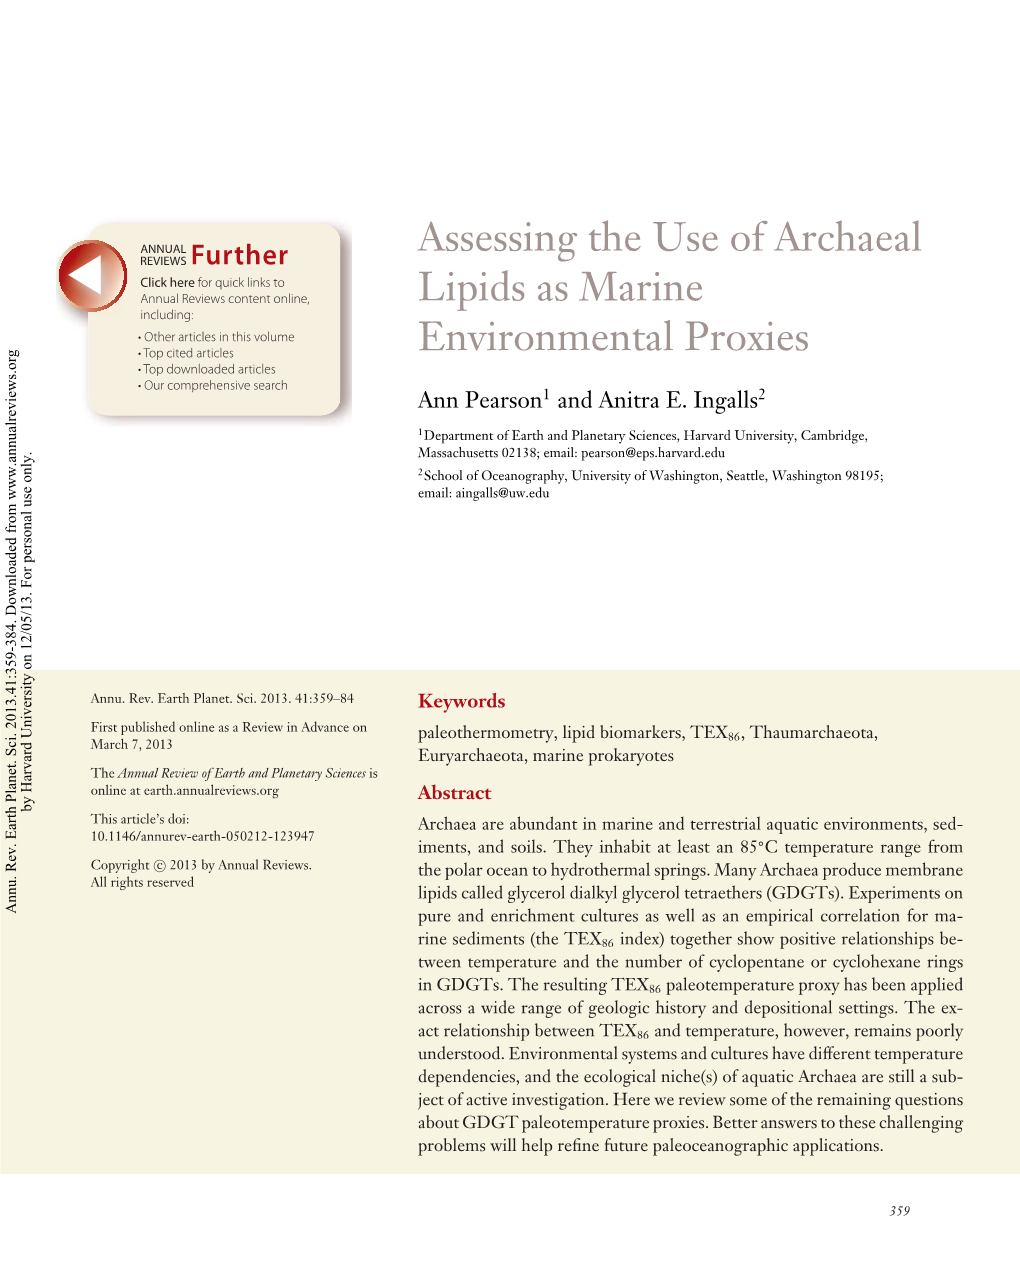 Assessing the Use of Archaeal Lipids As Marine Environmental Proxies